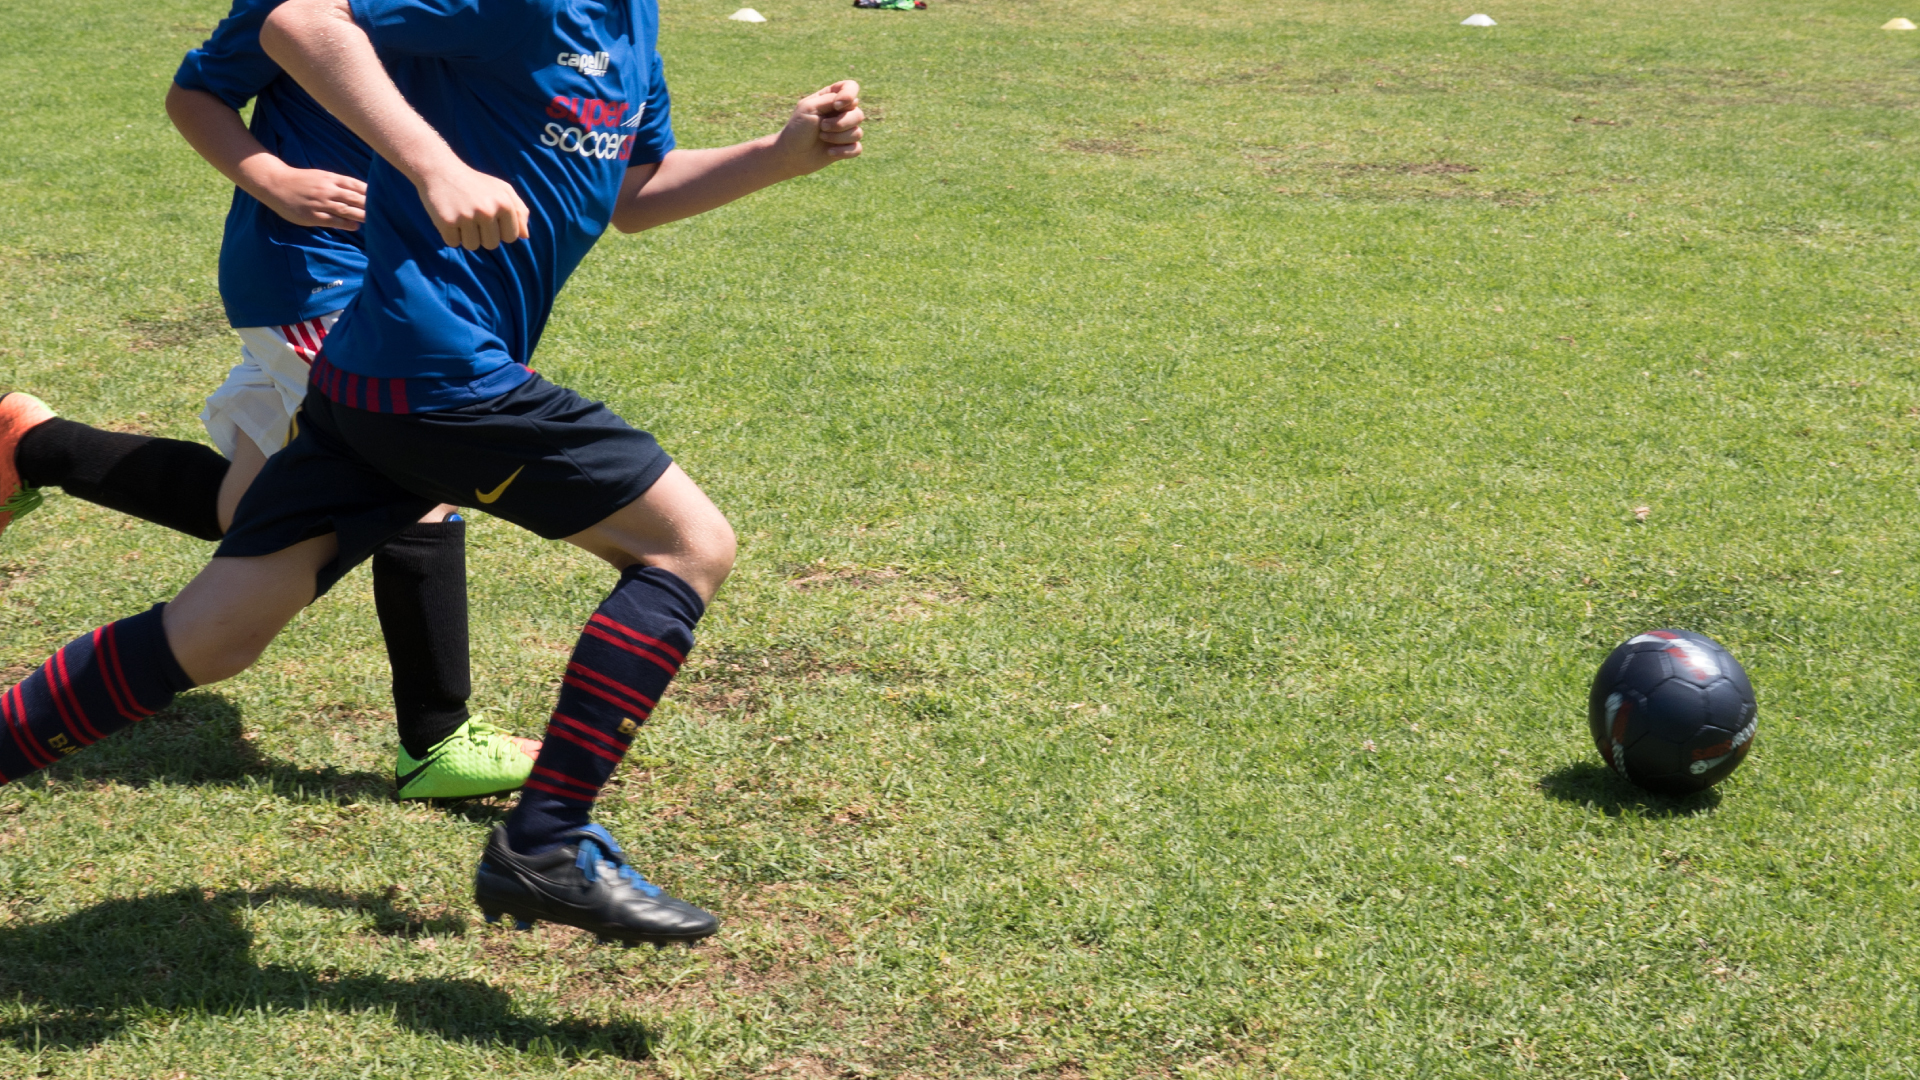 Pro Soccer Kids – Long Island & NYC Soccer Classes for Kids Age 2 to 11